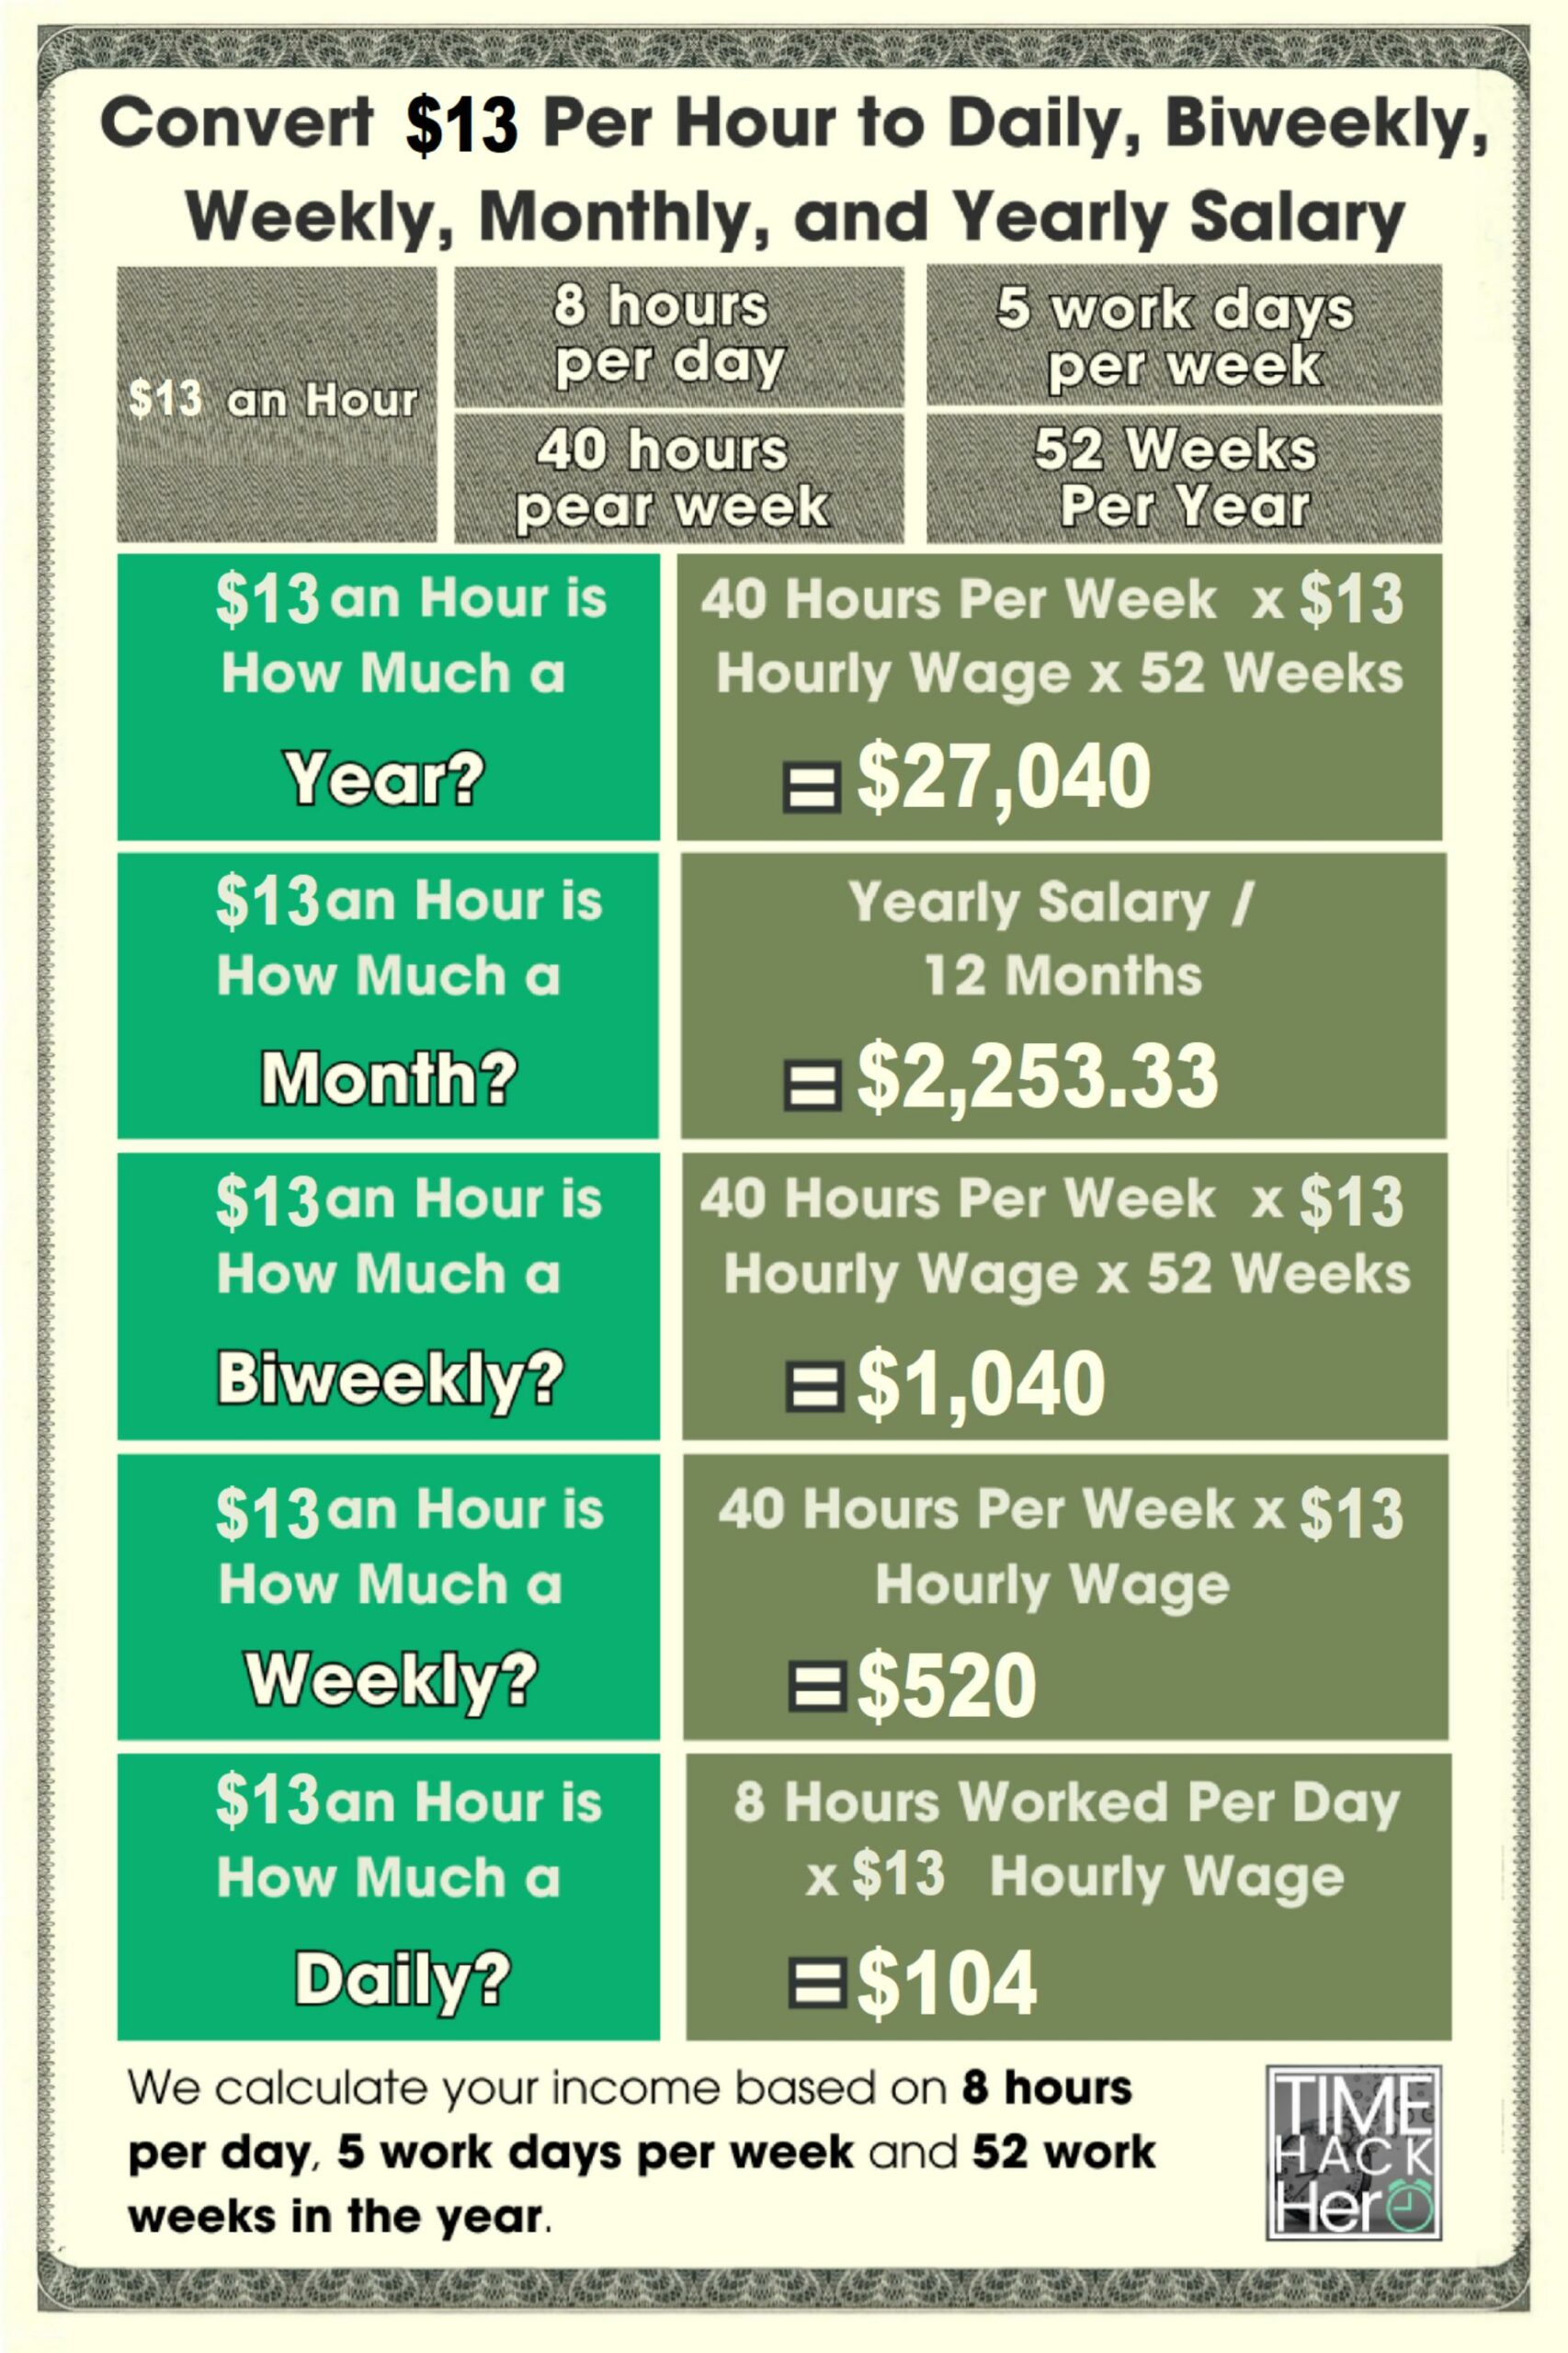 Convert $13 Per Hour to Daily, Biweekly, Weekly, Monthly, and Yearly Salary